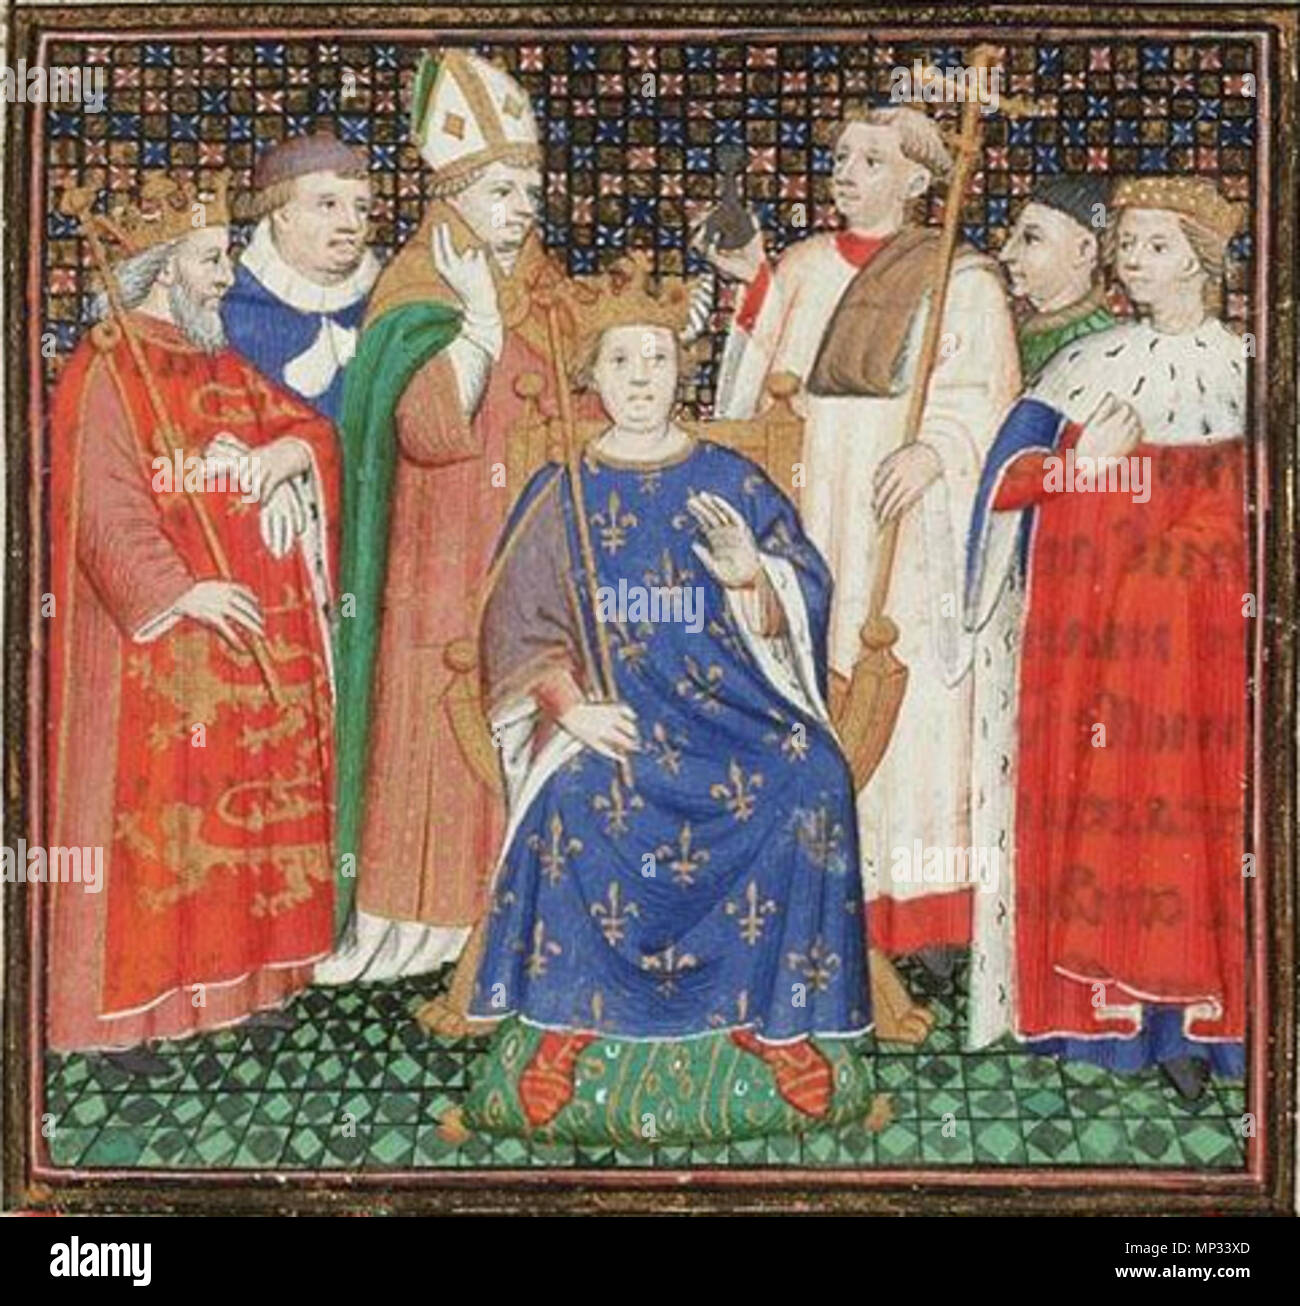 .  English: Vincent of Beauvais, Le Miroir Historial (Vol. IV). The coronation of Philip II Augustus in the presence of Henry II of England Place of origin, date: Paris, Master of the Cité des Dames (illuminator); c. 1400-1410 Material: Vellum, ff. 401, 425x320 (254x196) mm, 43 lines, littera cursiva, Binding: 18th-century brown leather; gilt; with coat of arms of Stadholder William V Decoration: 1 two-column miniature (185x200 mm); 19 column miniatures (110/70x90/85 mm); decorated initials with border decoration (ff. 3r, 10r, 15r, 19r, 20r, etc.) Added: 1 illustration in the margin (coat of a Stock Photo